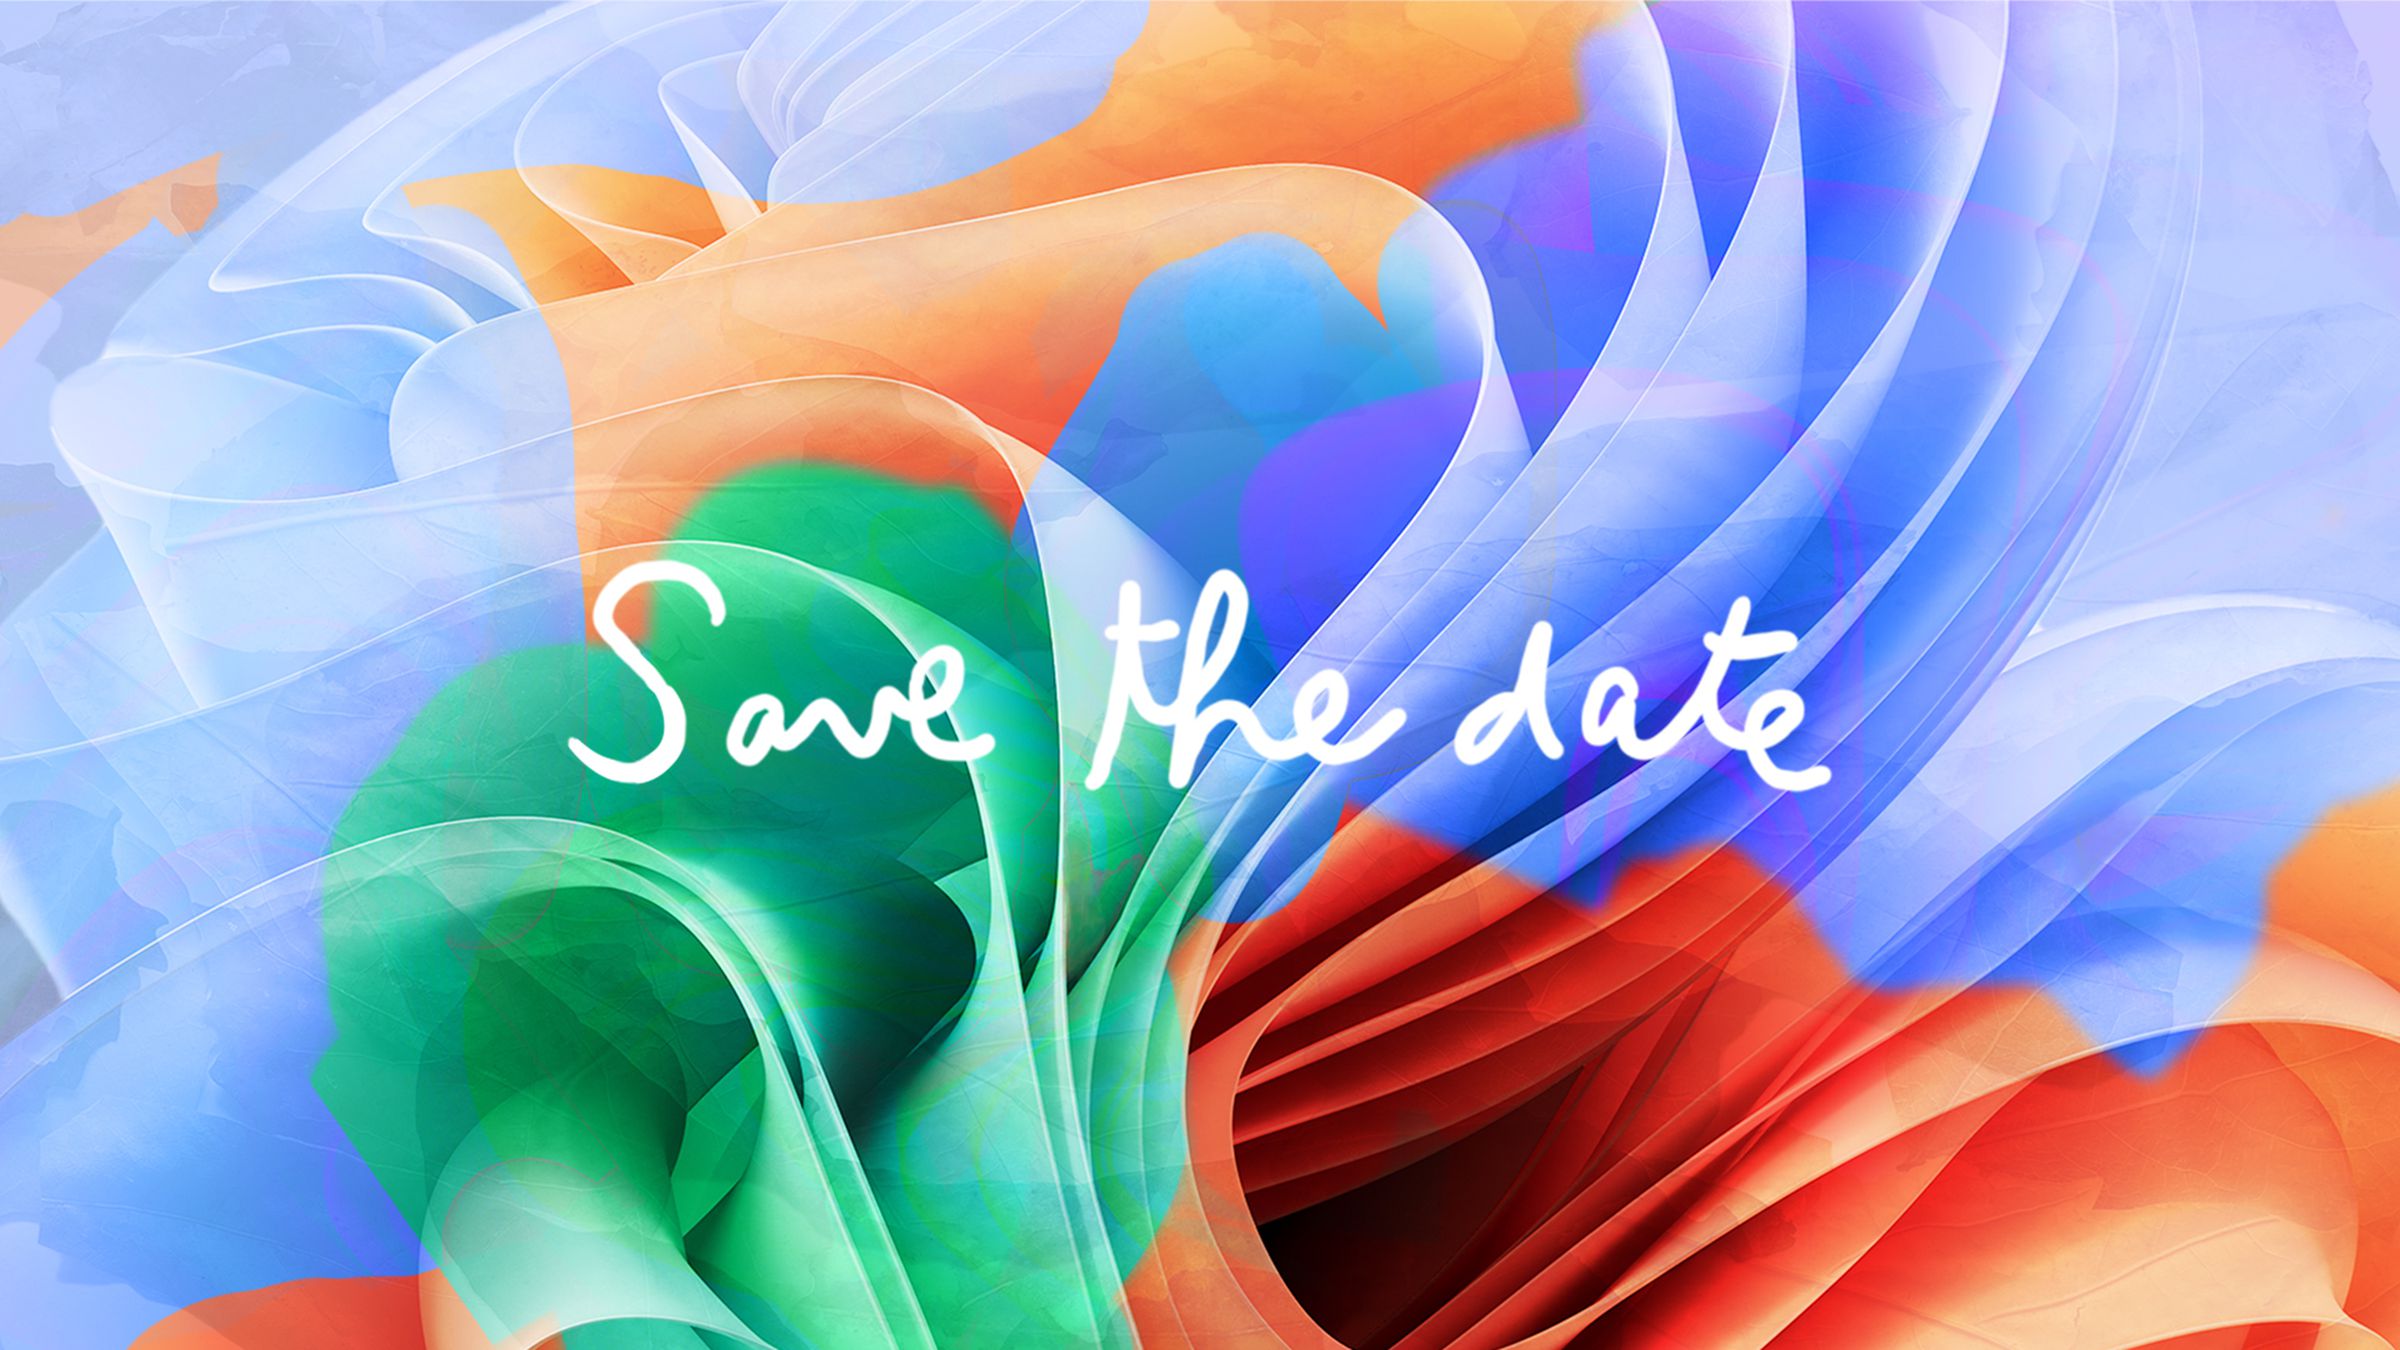 A save the date email from Microsoft about a Surface event